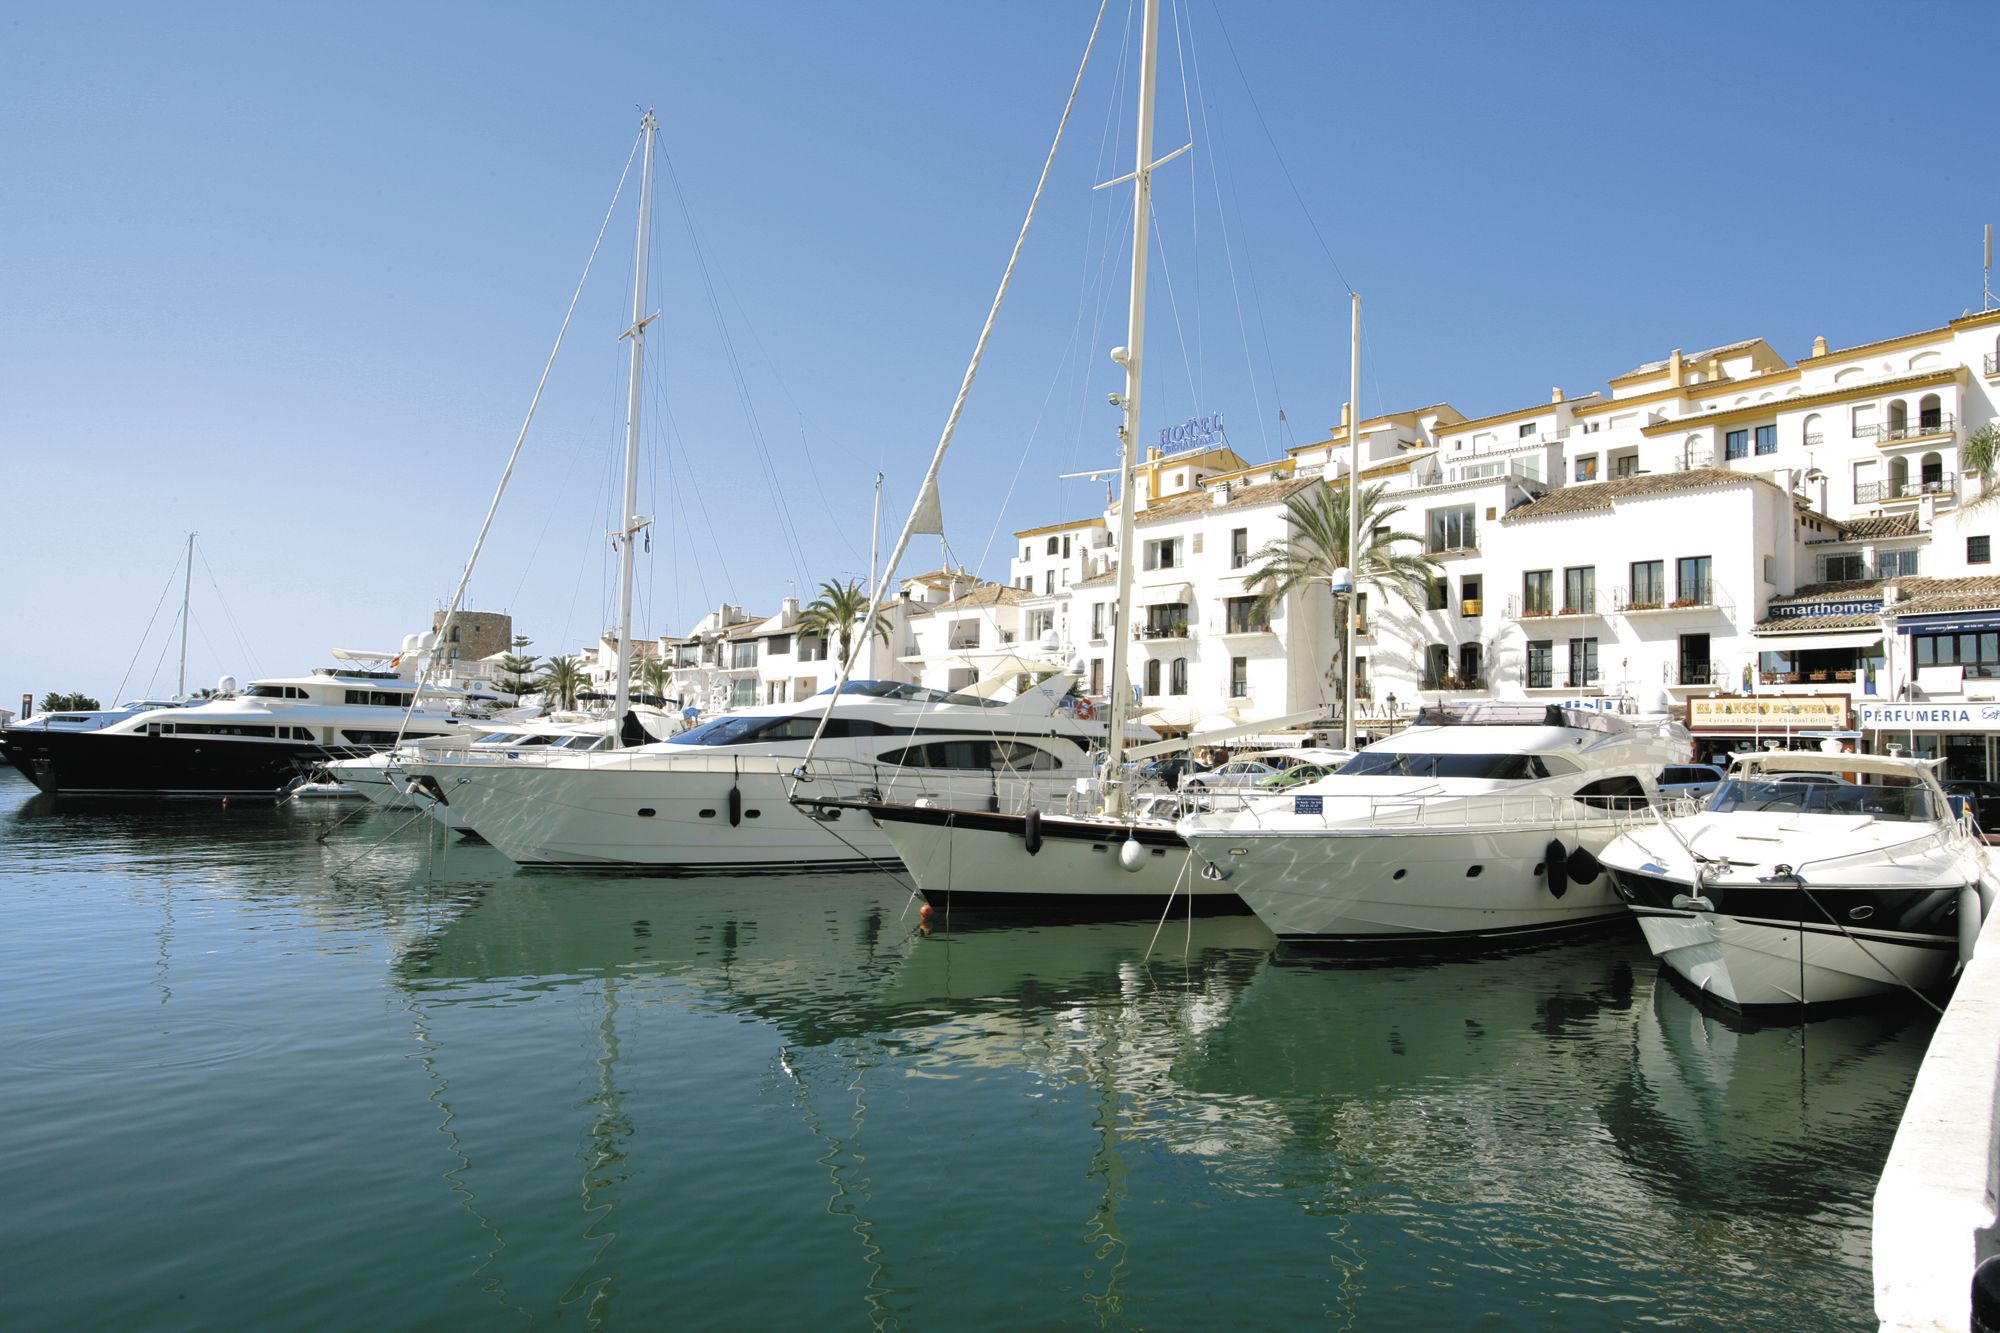 ⭐10 essential things to visit and do in Puerto Banús